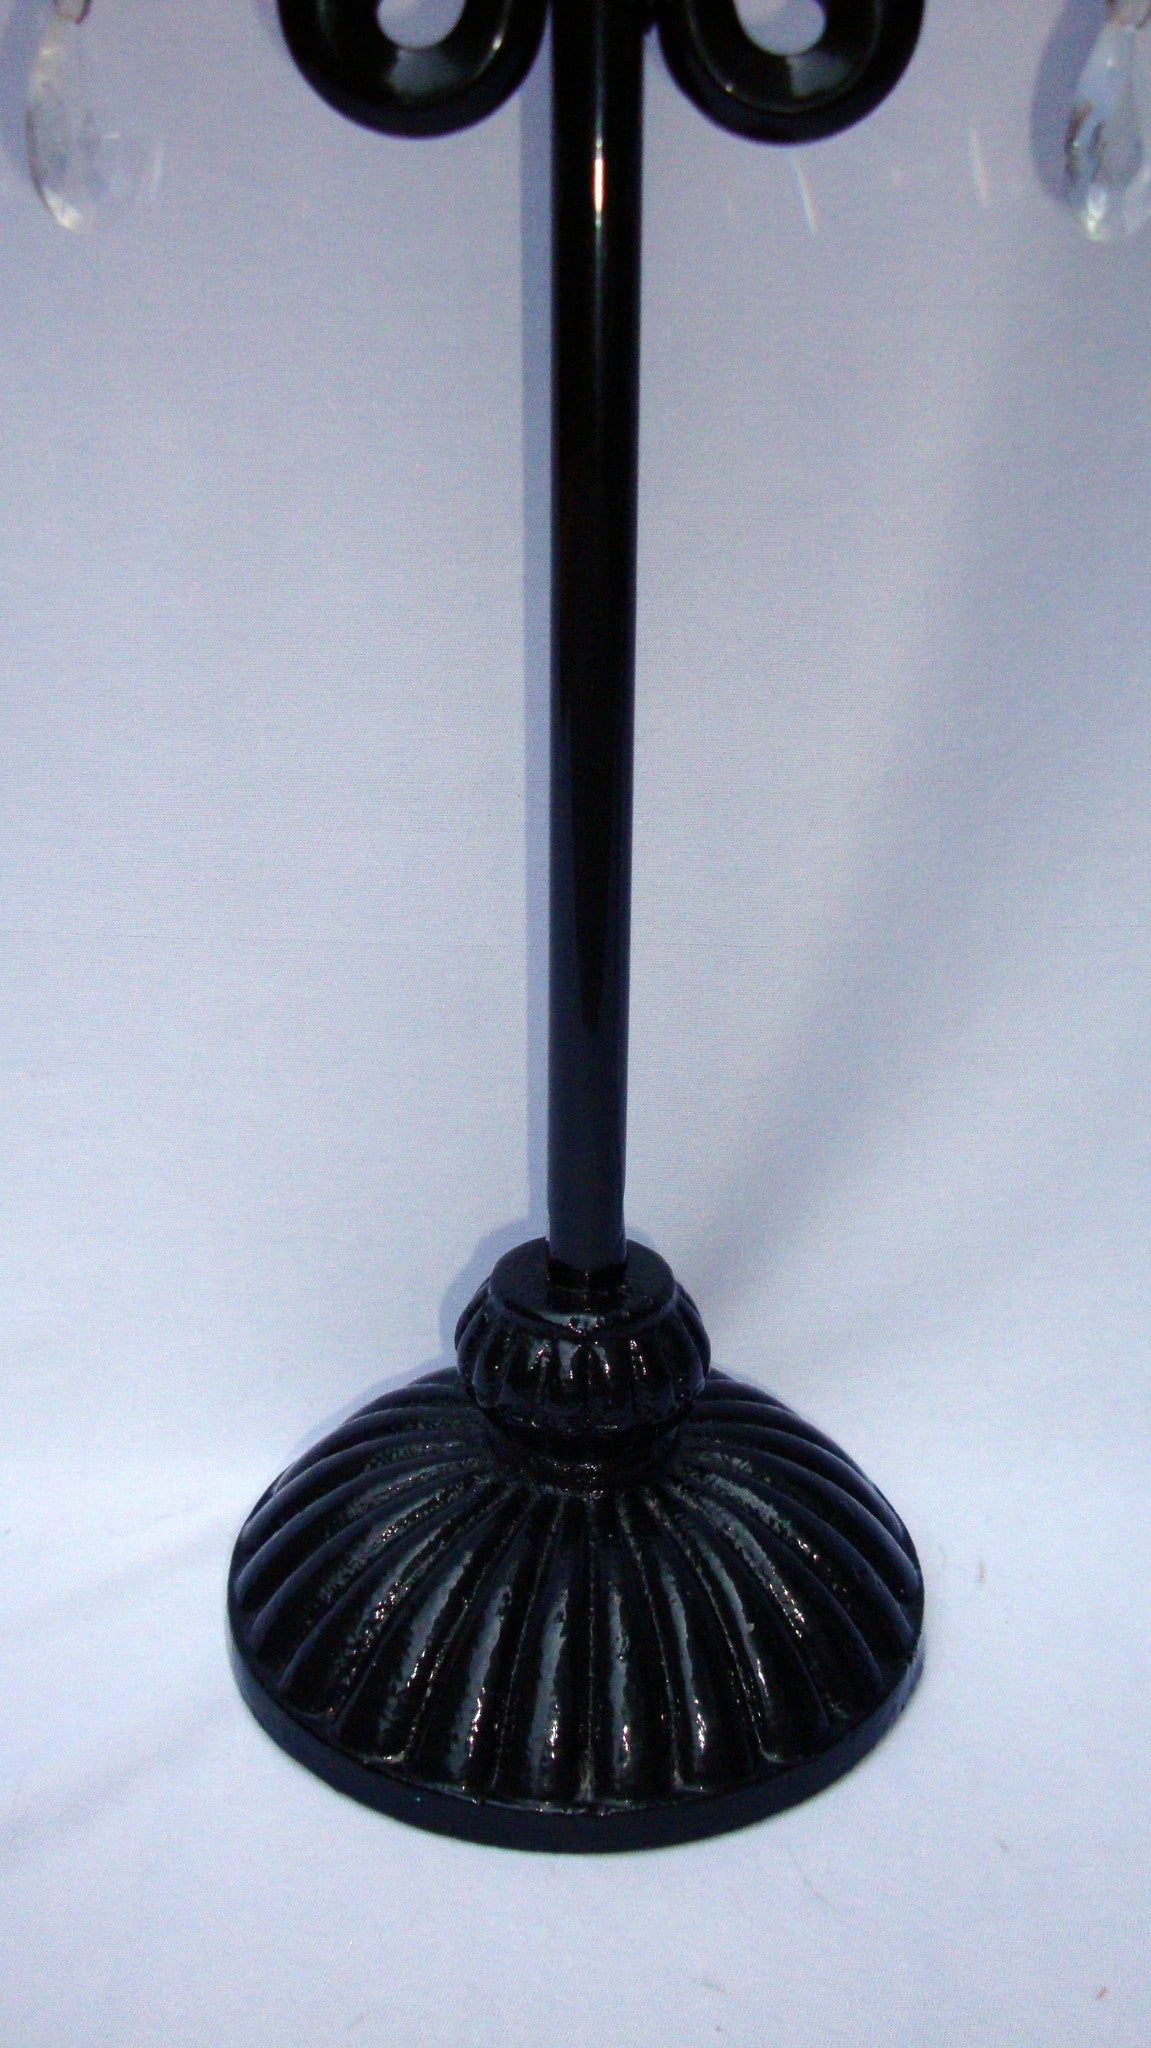 [SOLD] Large Gothic Deco Black Metal Crystal Candleabra